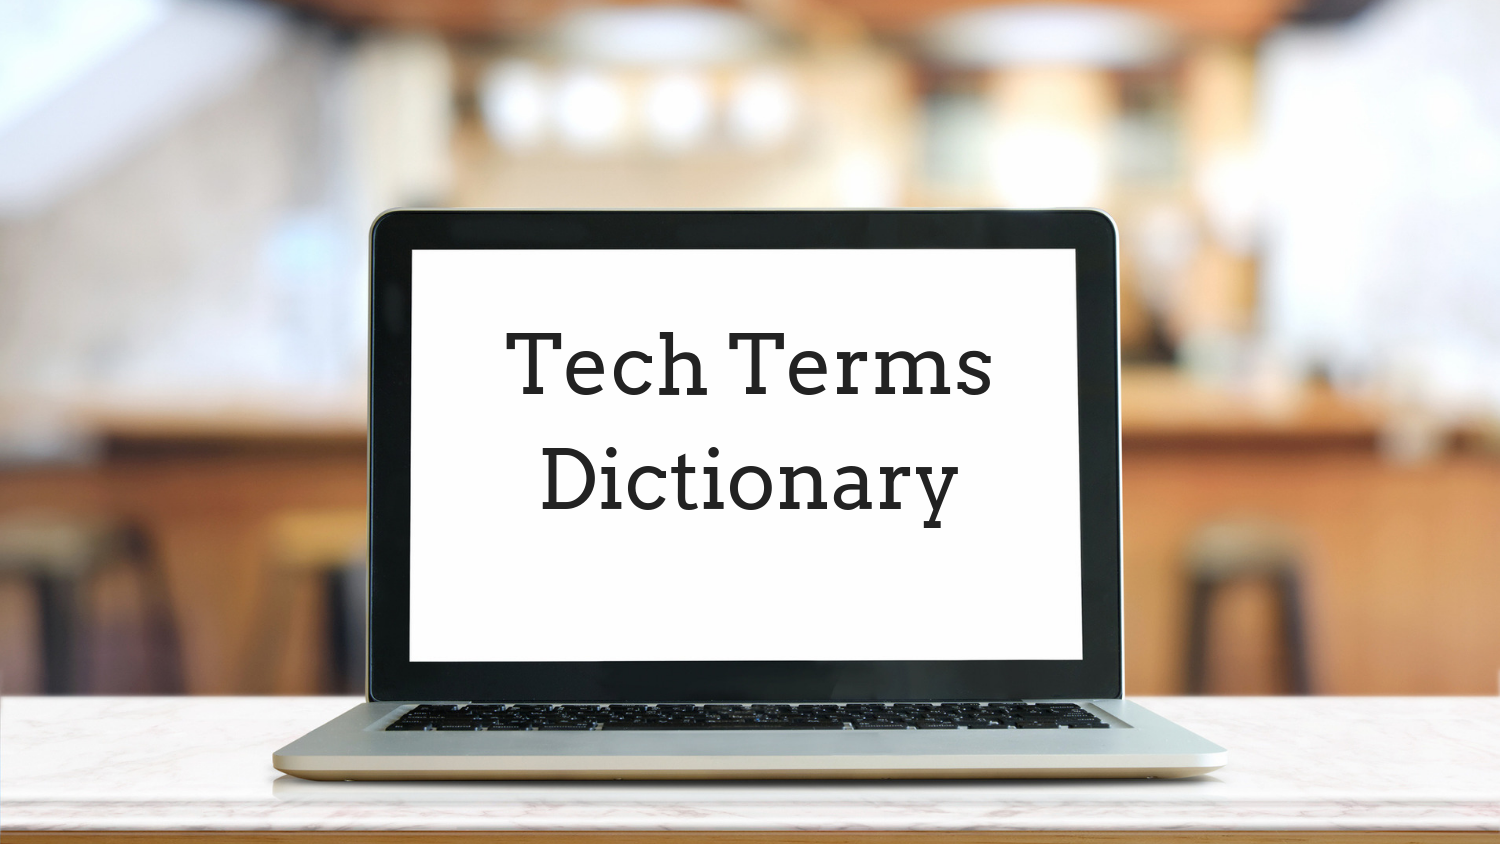 the tech terms computer dictionary.